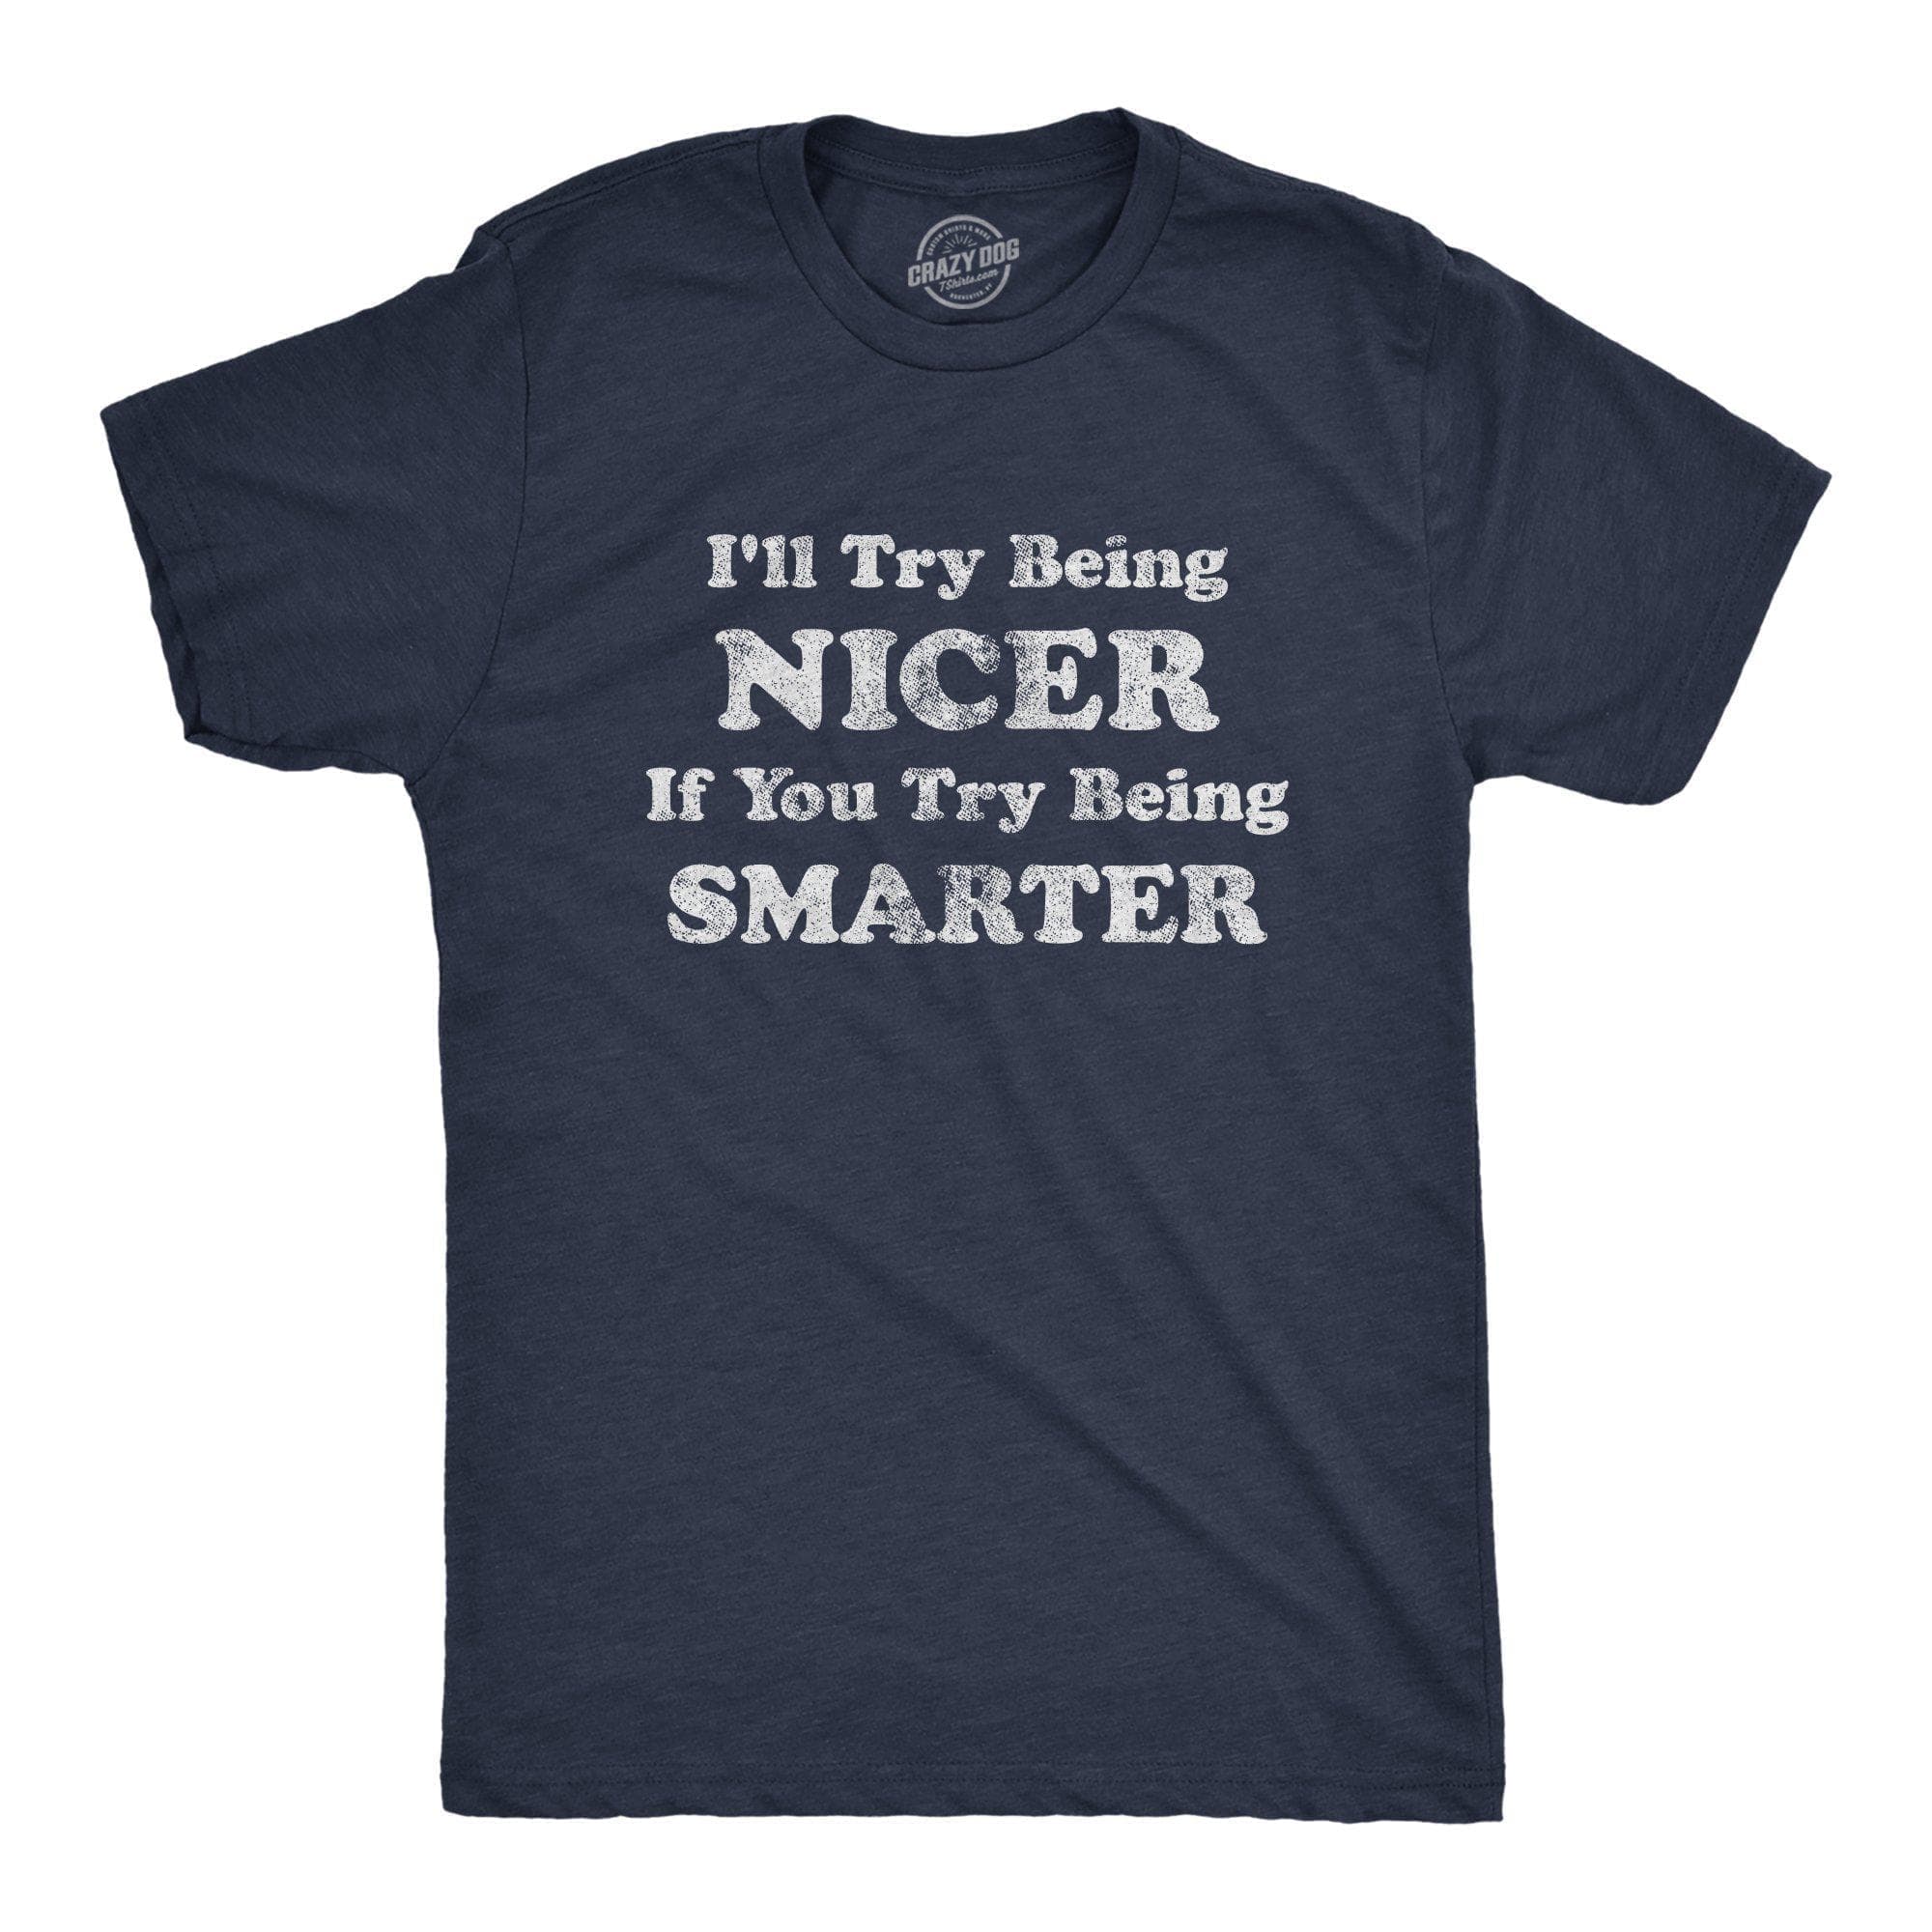 I'll Try Being Nicer If You Try Being Smarter Men's Tshirt - Crazy Dog T-Shirts